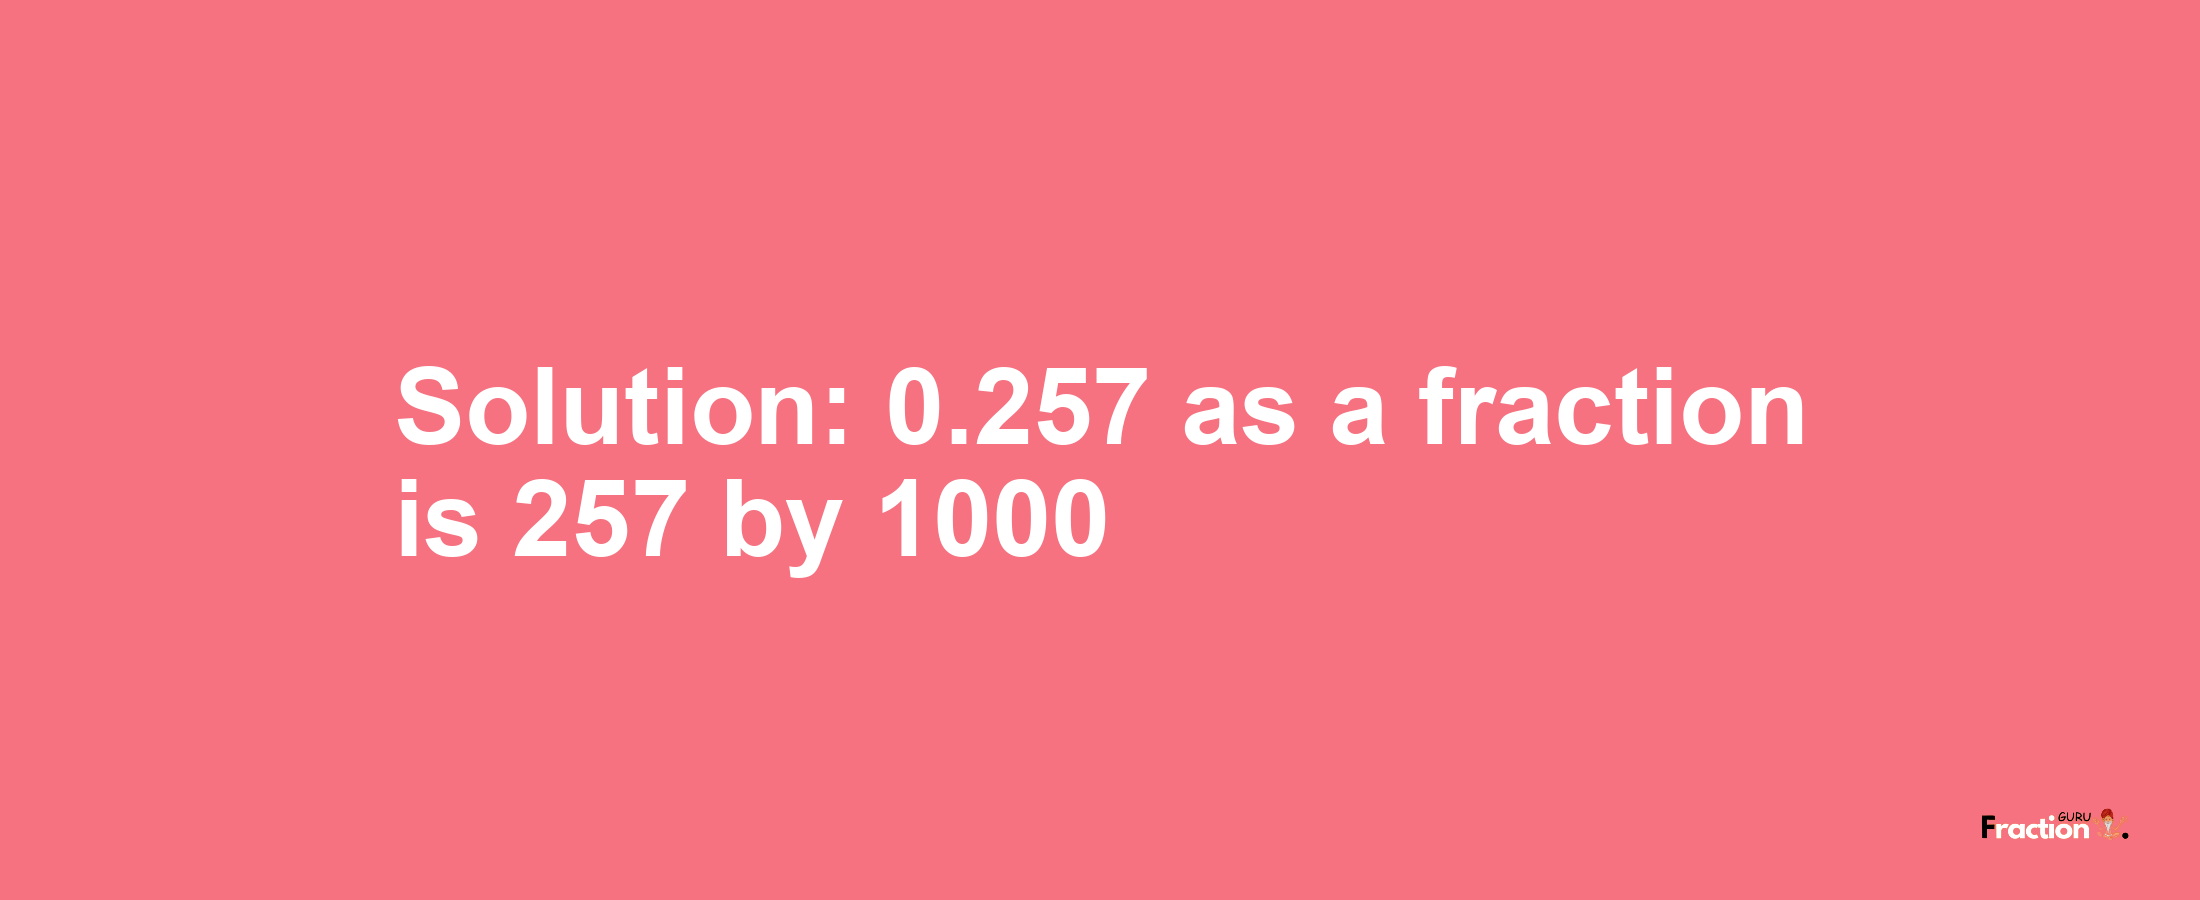 Solution:0.257 as a fraction is 257/1000